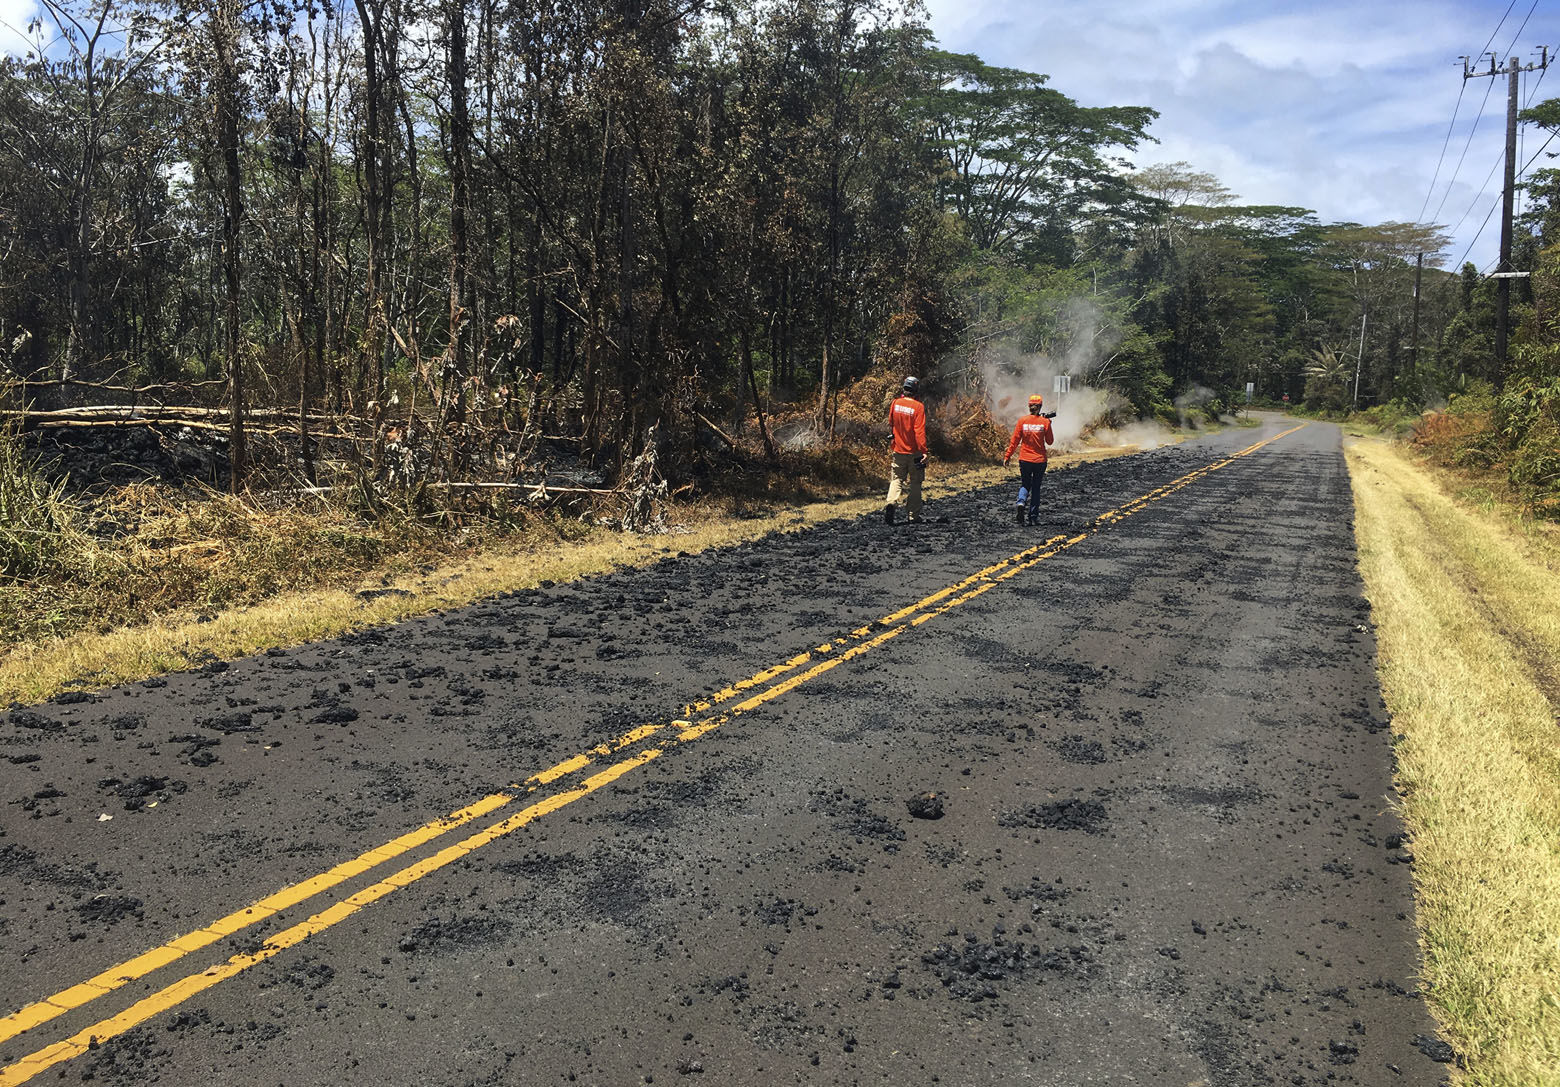 In this Sunday, May 6, 2018 photo provided by the U.S. Geological Survey, USGS scientists monitoring the eruption of Kilauea volcano in Leilani Estates walk past spatter that erupted from a fissure on Leilani Avenue,  in the Leilani Estates subdivision near Pahoa on the island of Hawaii. Kilauea volcano has destroyed more than two dozen homes since it began spewing lava hundreds of feet into the air last week, and residents who evacuated don't know how long they might be displaced. The decimated homes were in the Leilani Estates subdivision, where molten rock, toxic gas and steam have been bursting through openings in the ground created by the volcano. (U.S. Geological Survey via AP)